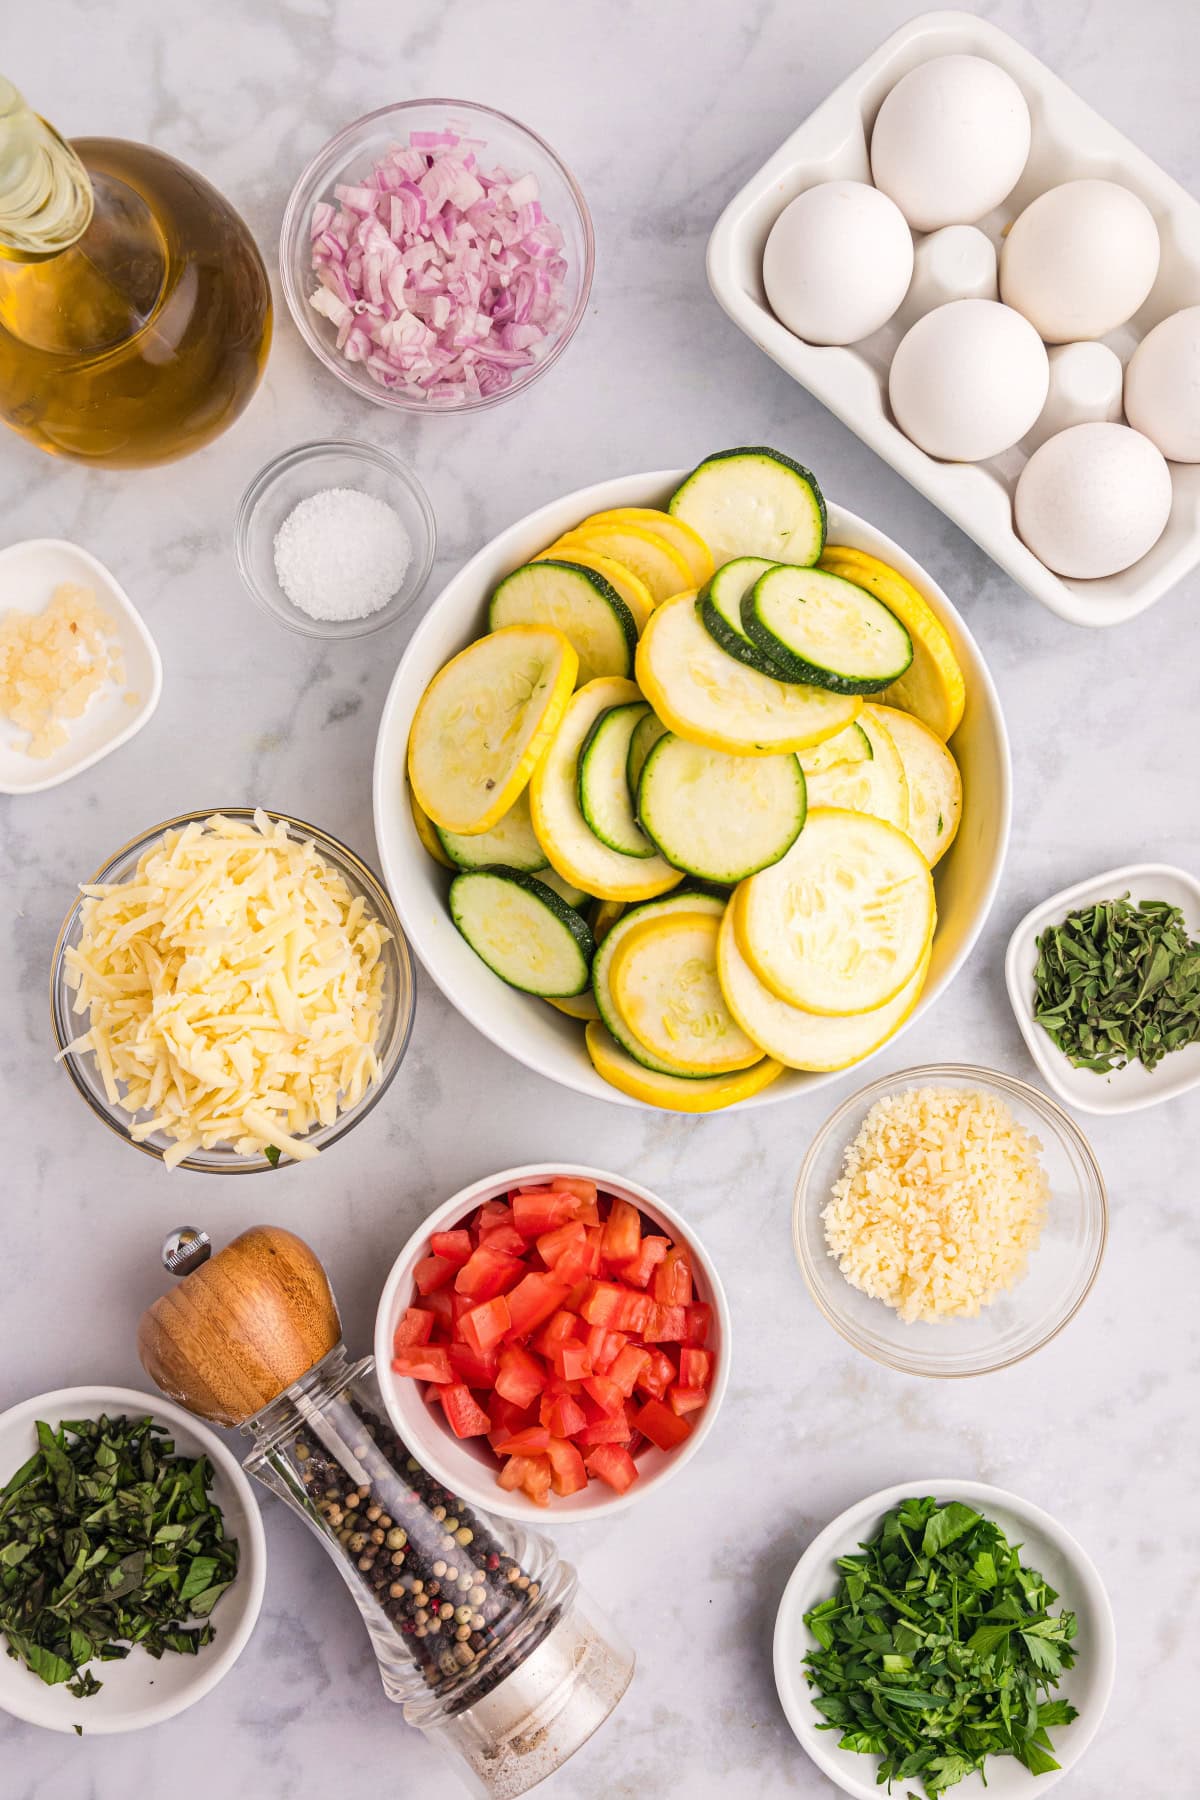 ingredients displayed for making squash and tomato oven frittata